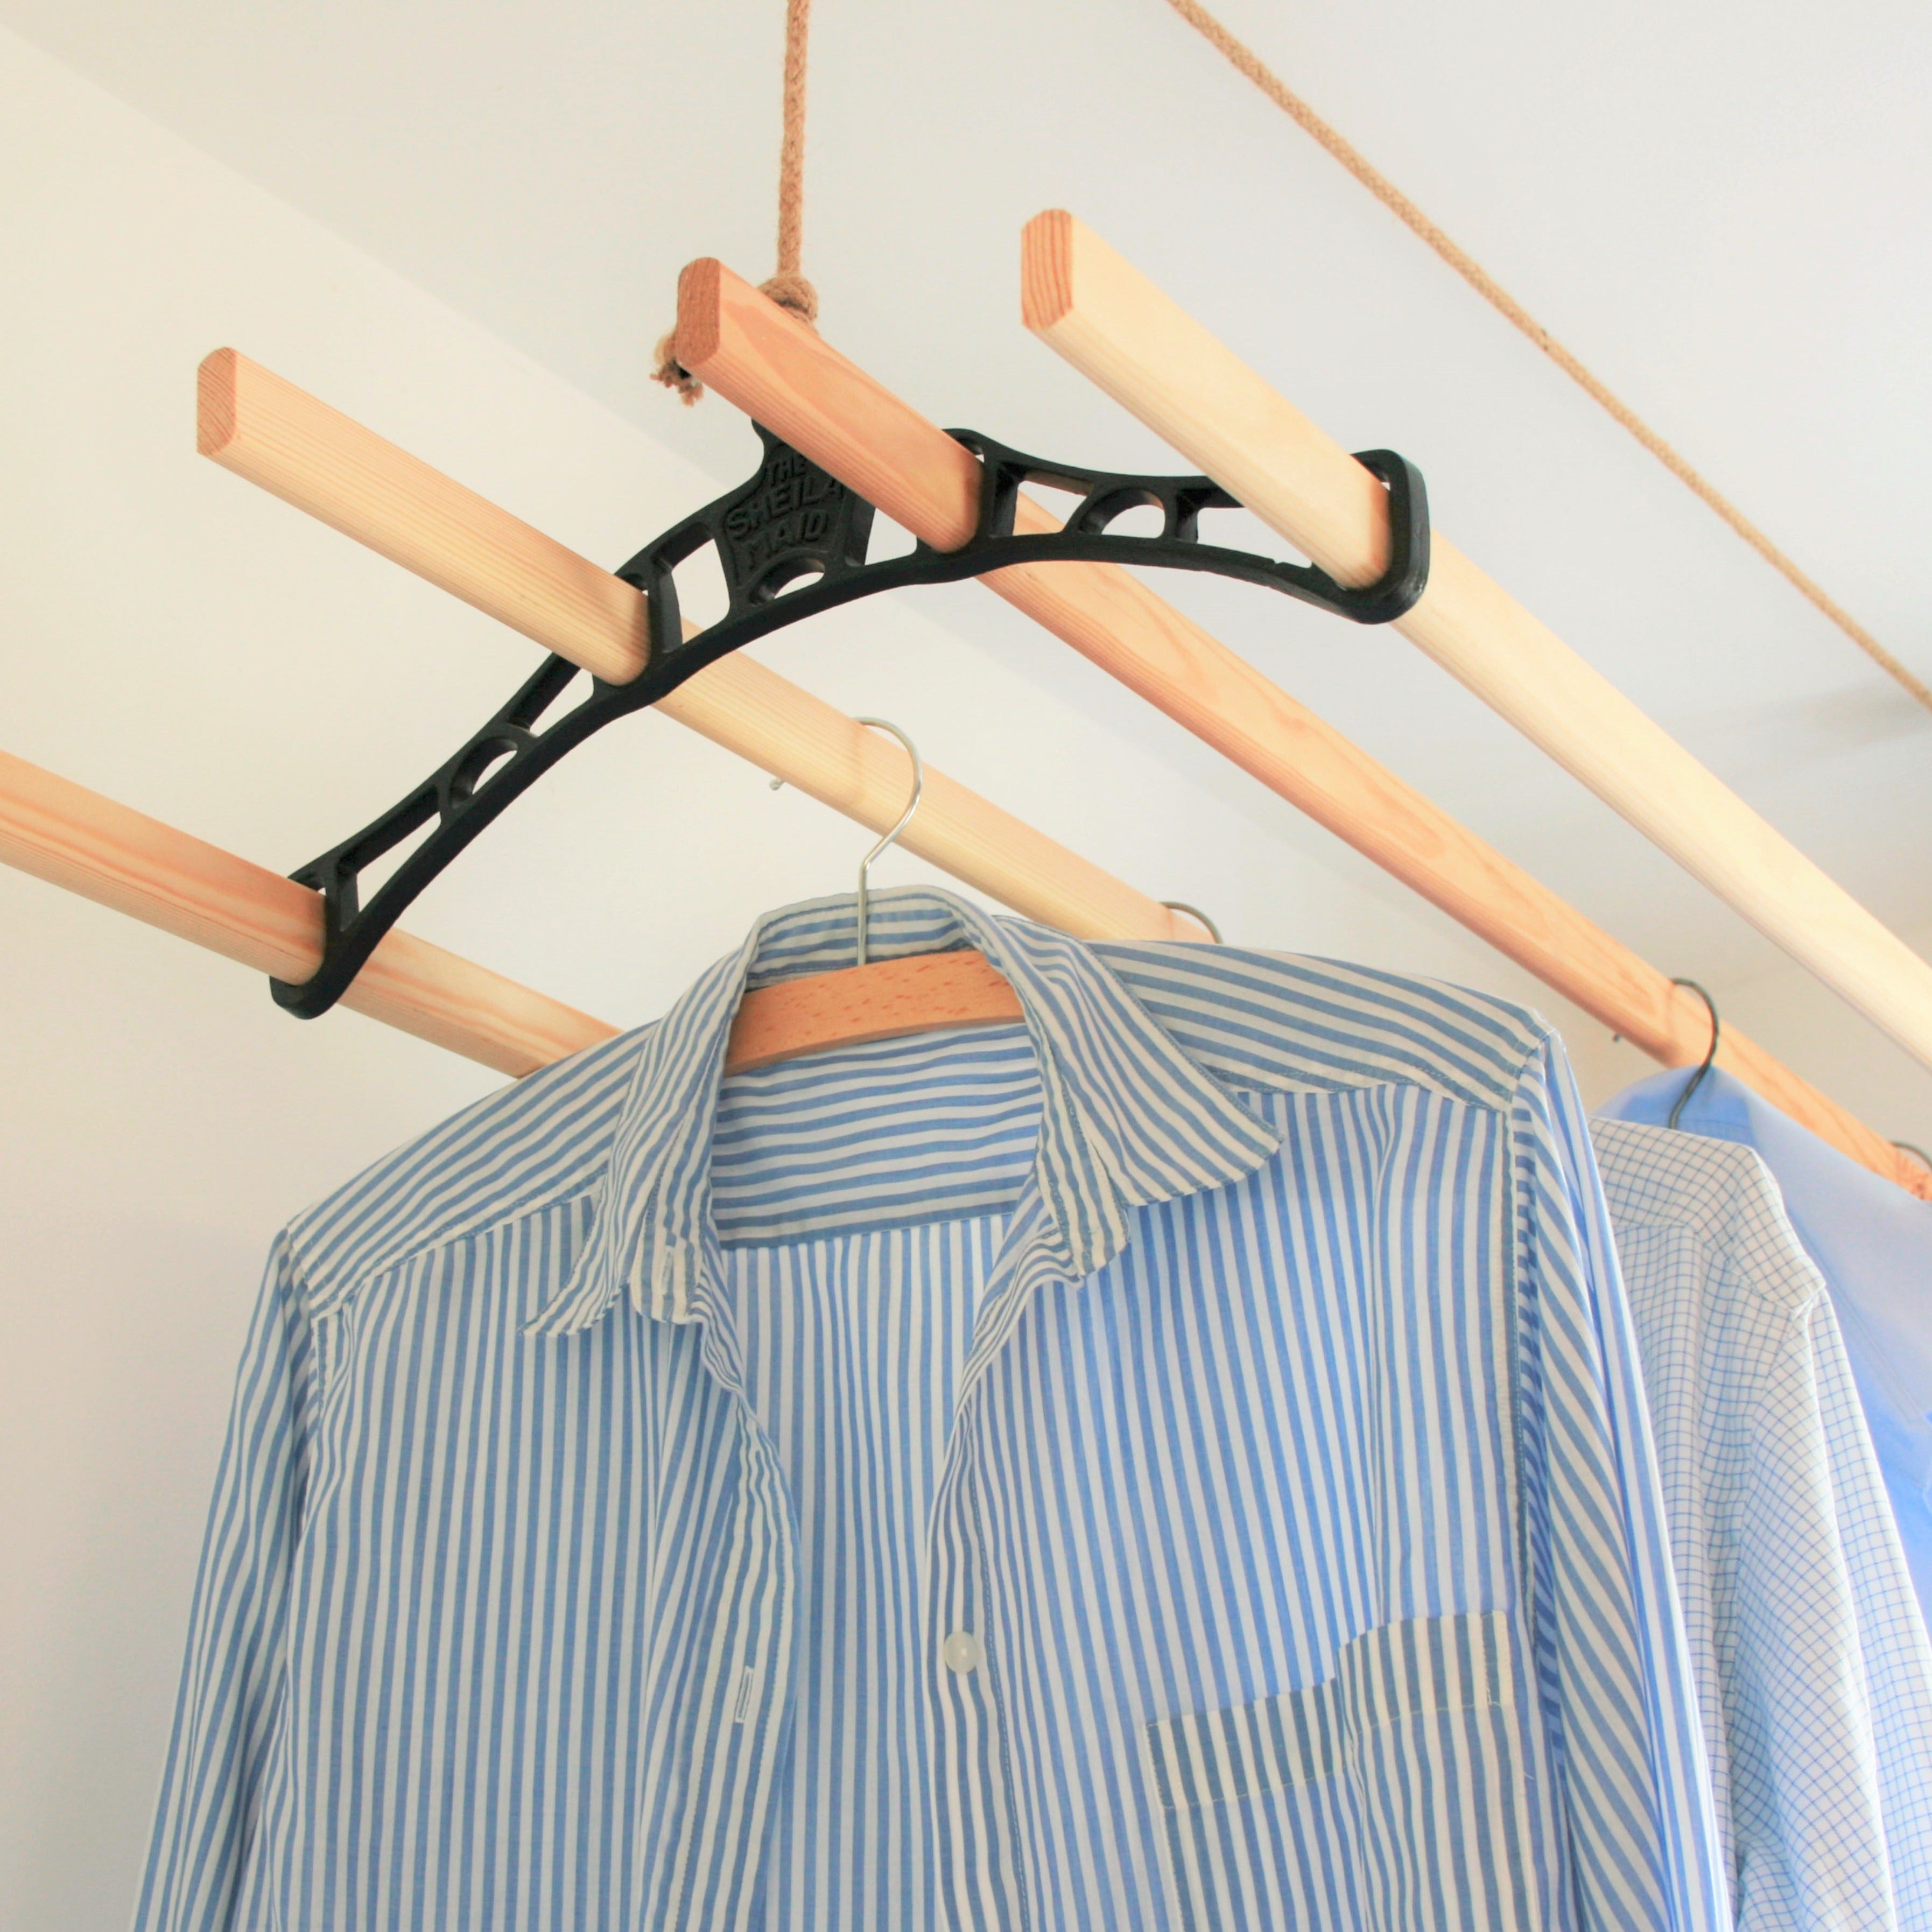 Sheila Maid clothes airer laundry ceiling airer